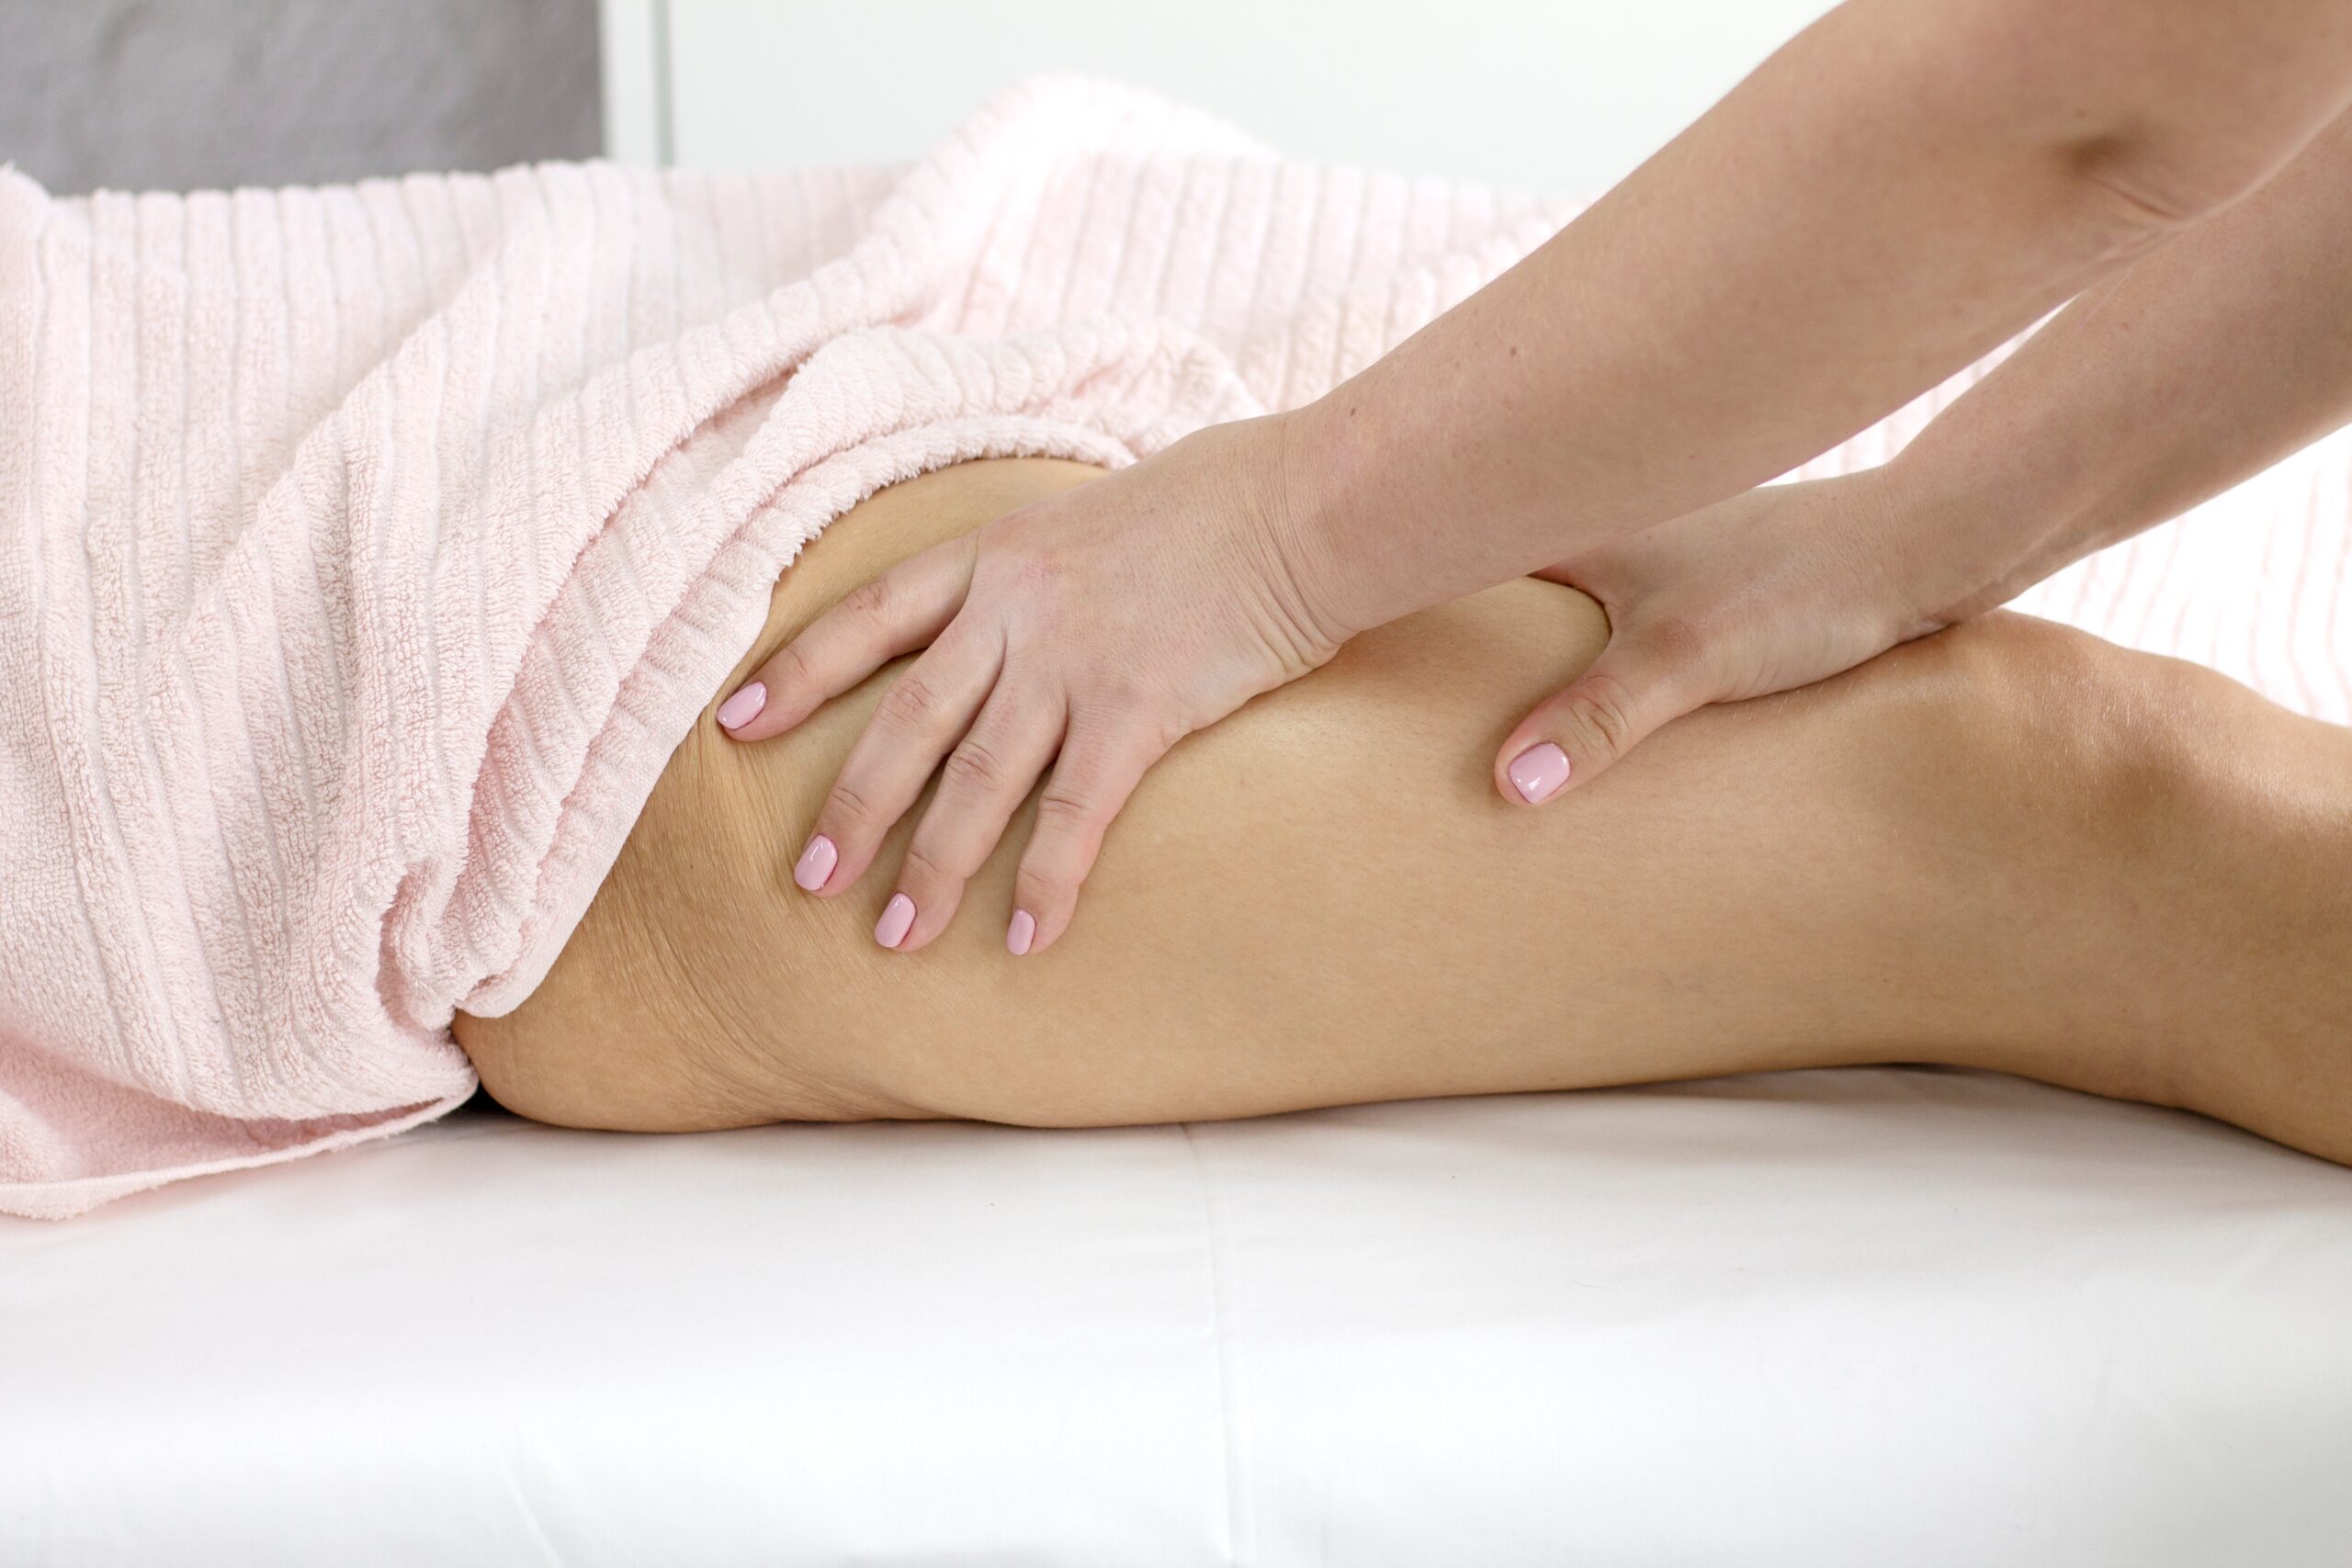 The,Procedure,Of,Wrapping,The,Legs,After,The,Massage,Is